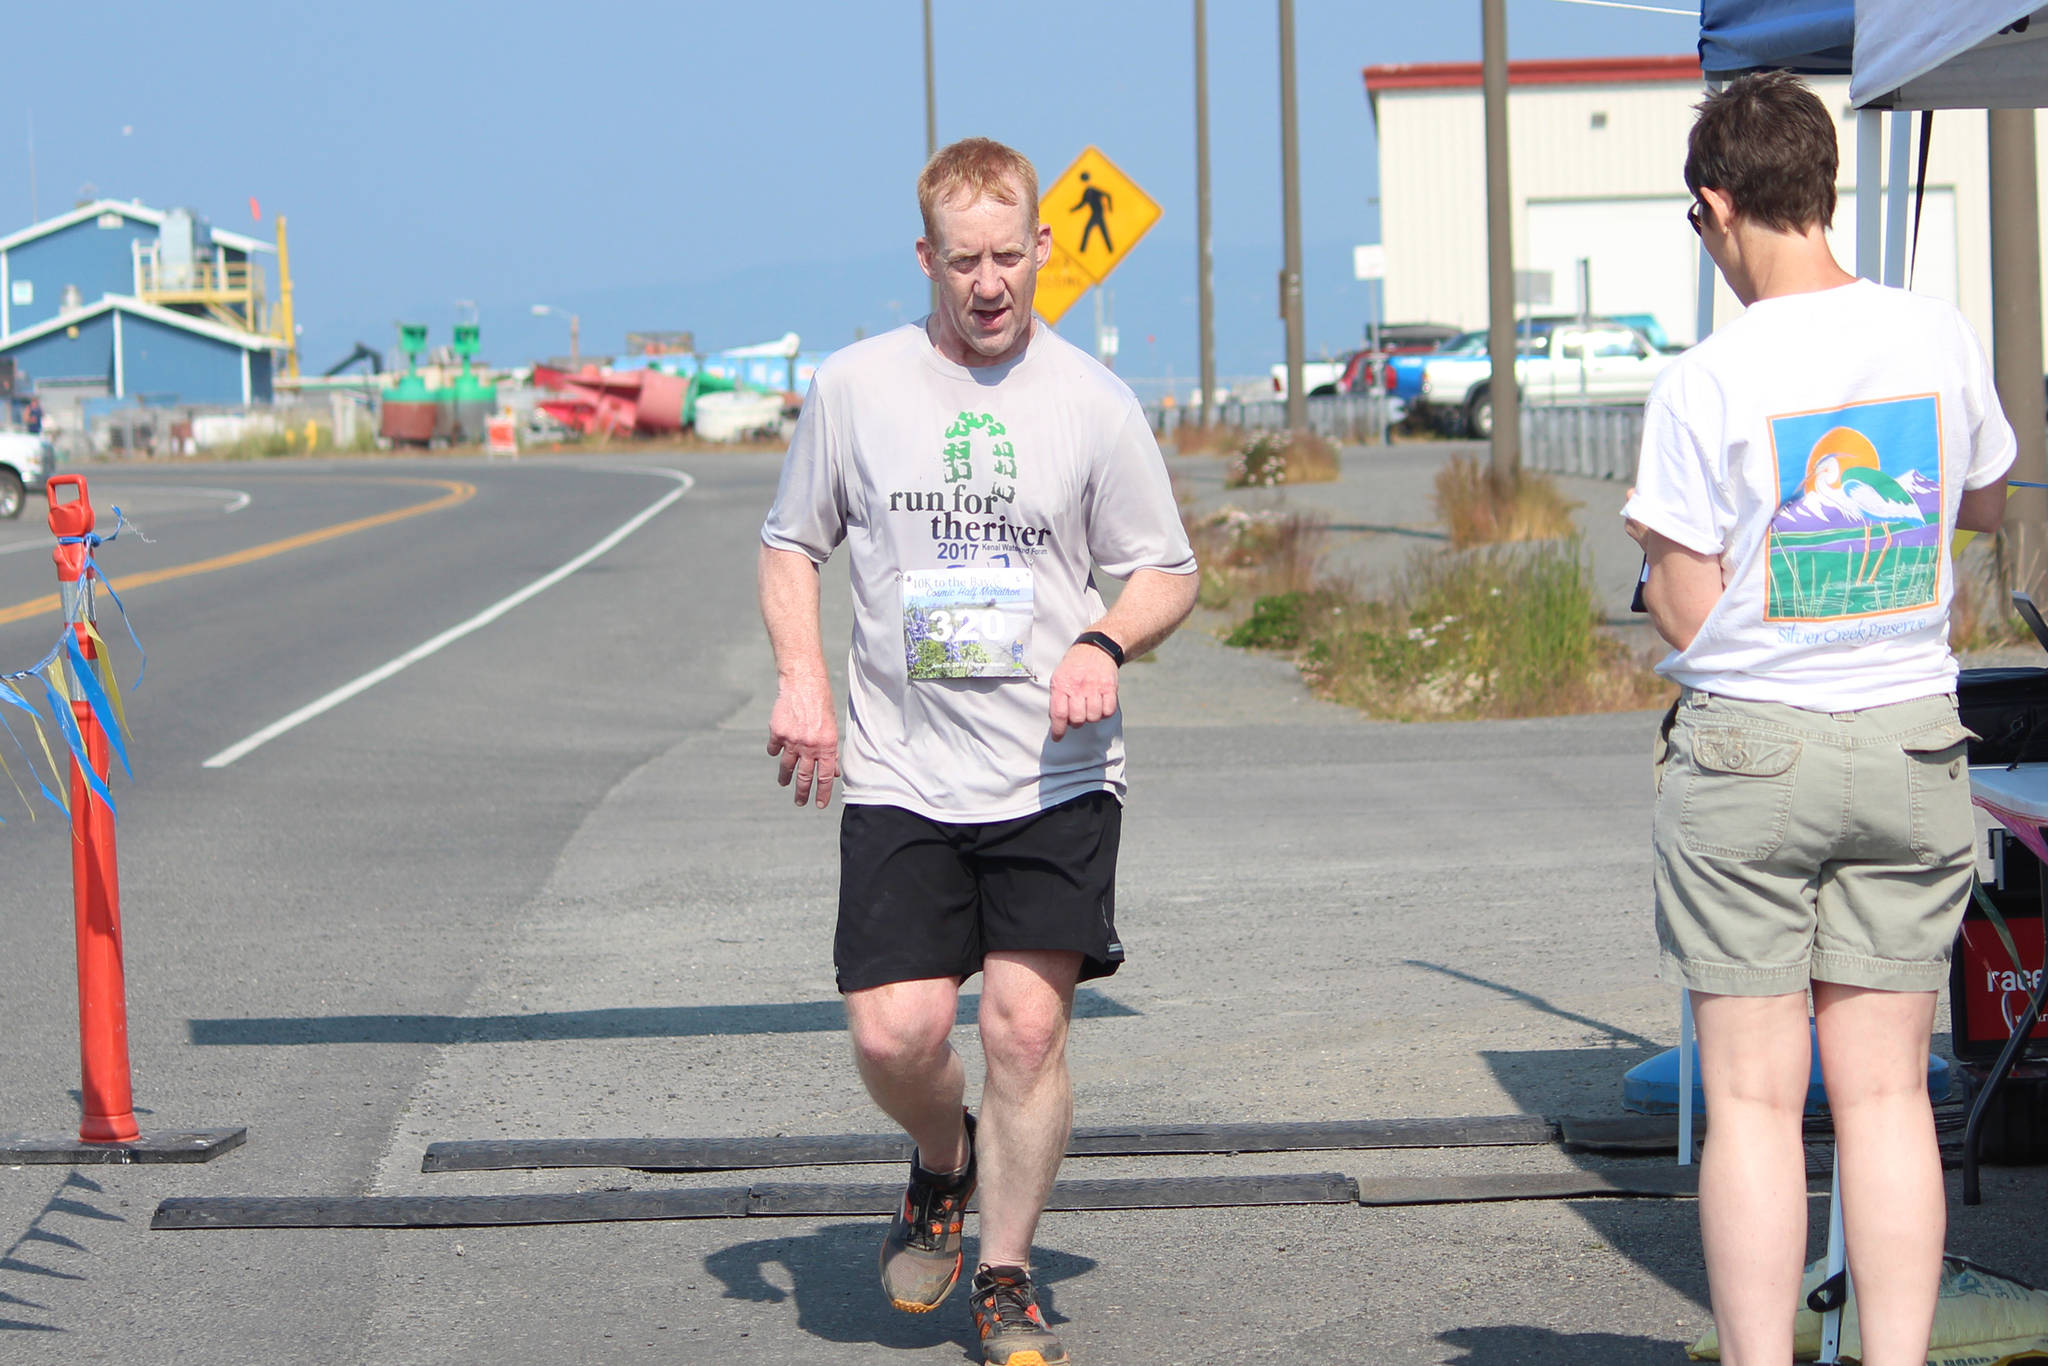 Soldotna’s Kent Petersen crosses the finish line of the Spit Run 10k to the Bay on Saturday, June 29, 2019 in Homer, Alaska. (Photo by Megan Pacer/Homer News)